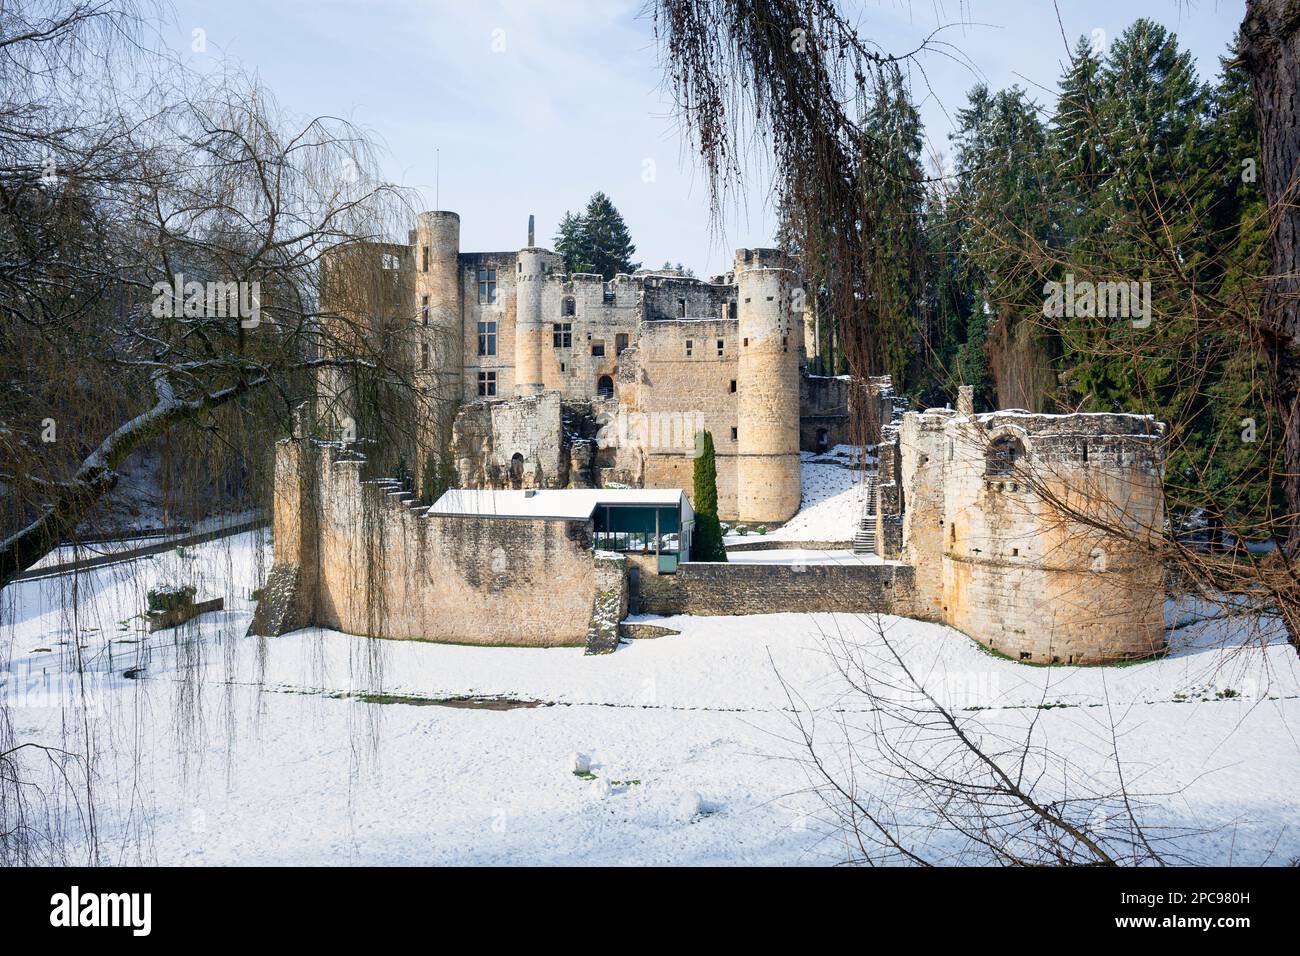 Europe, Luxembourg, Grevenmacher, Beaufort Castle with Winter Snow Stock Photo